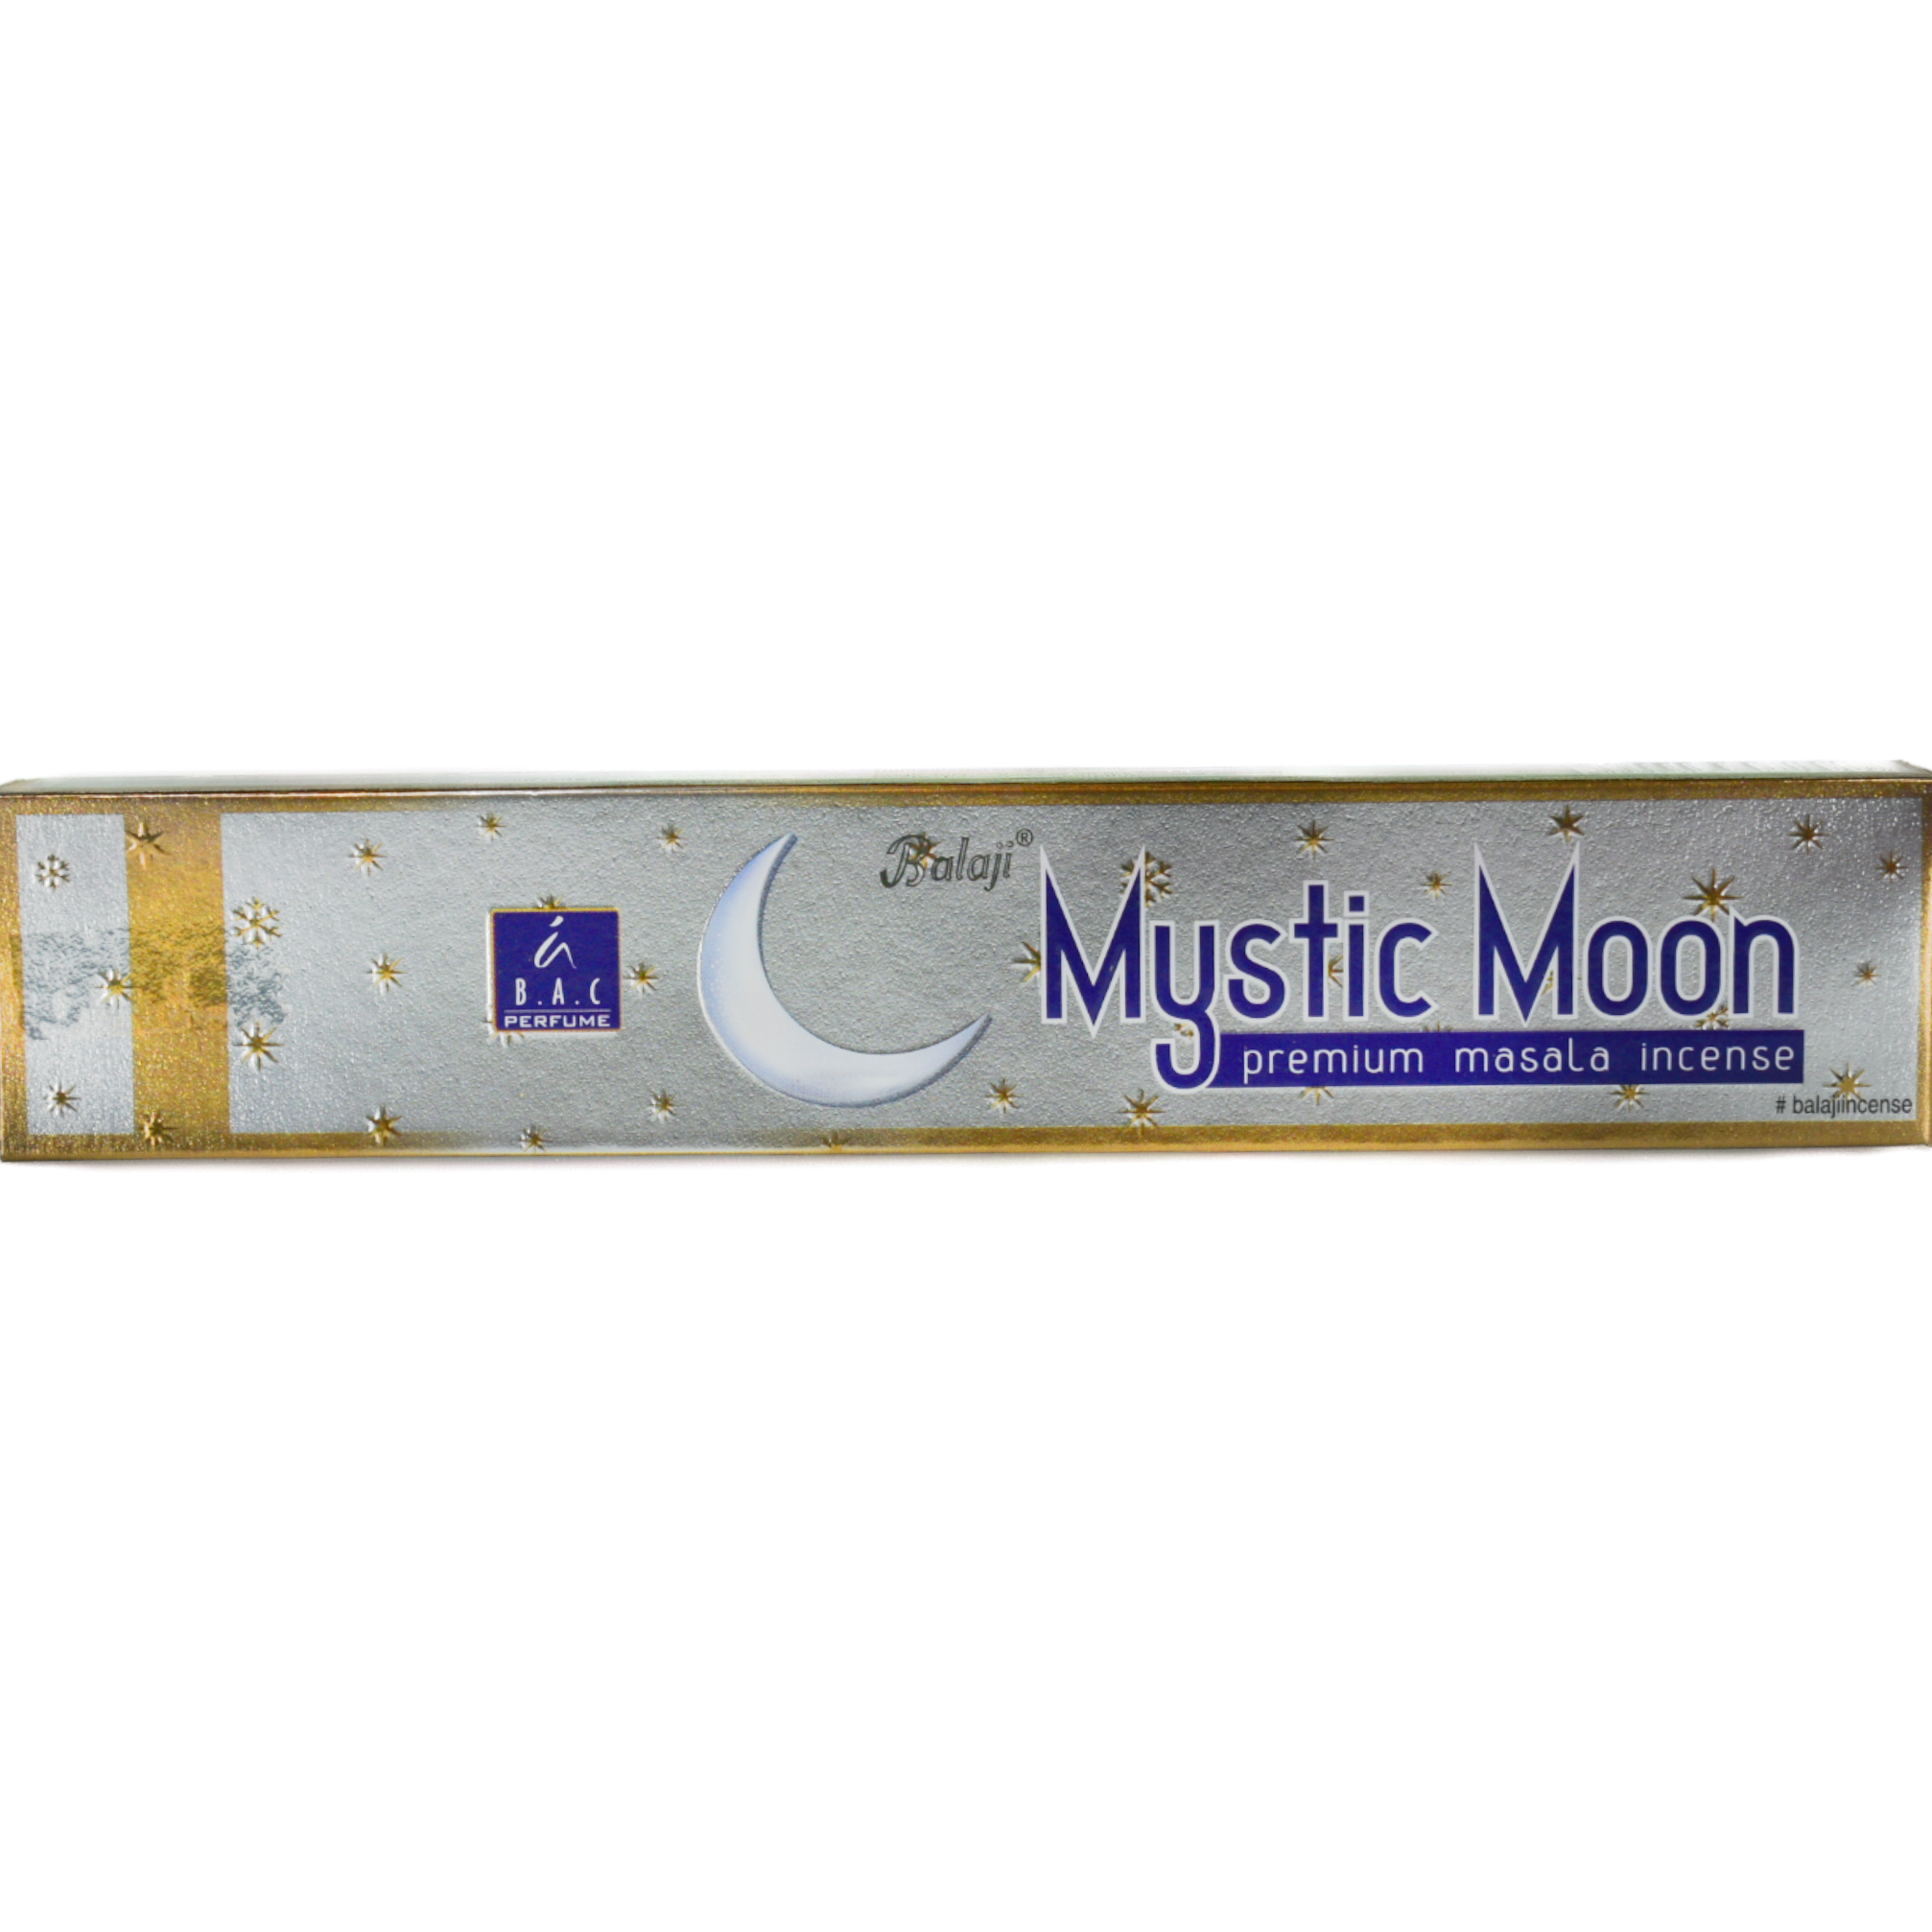 Mystic Moon Incense Sticks.  The box is silver and the present moon also.  The border is gold and gold stars.  There is a small blue square on the left side that has B. A. C. Perfume for the company name.  The moon is towards the center.  Balaji is above the moon.  On the right hand side the title is bold in blue with a white border, Mystic Moon.  Below it in a blue rectangle with white lettering it says premium masala incense.  